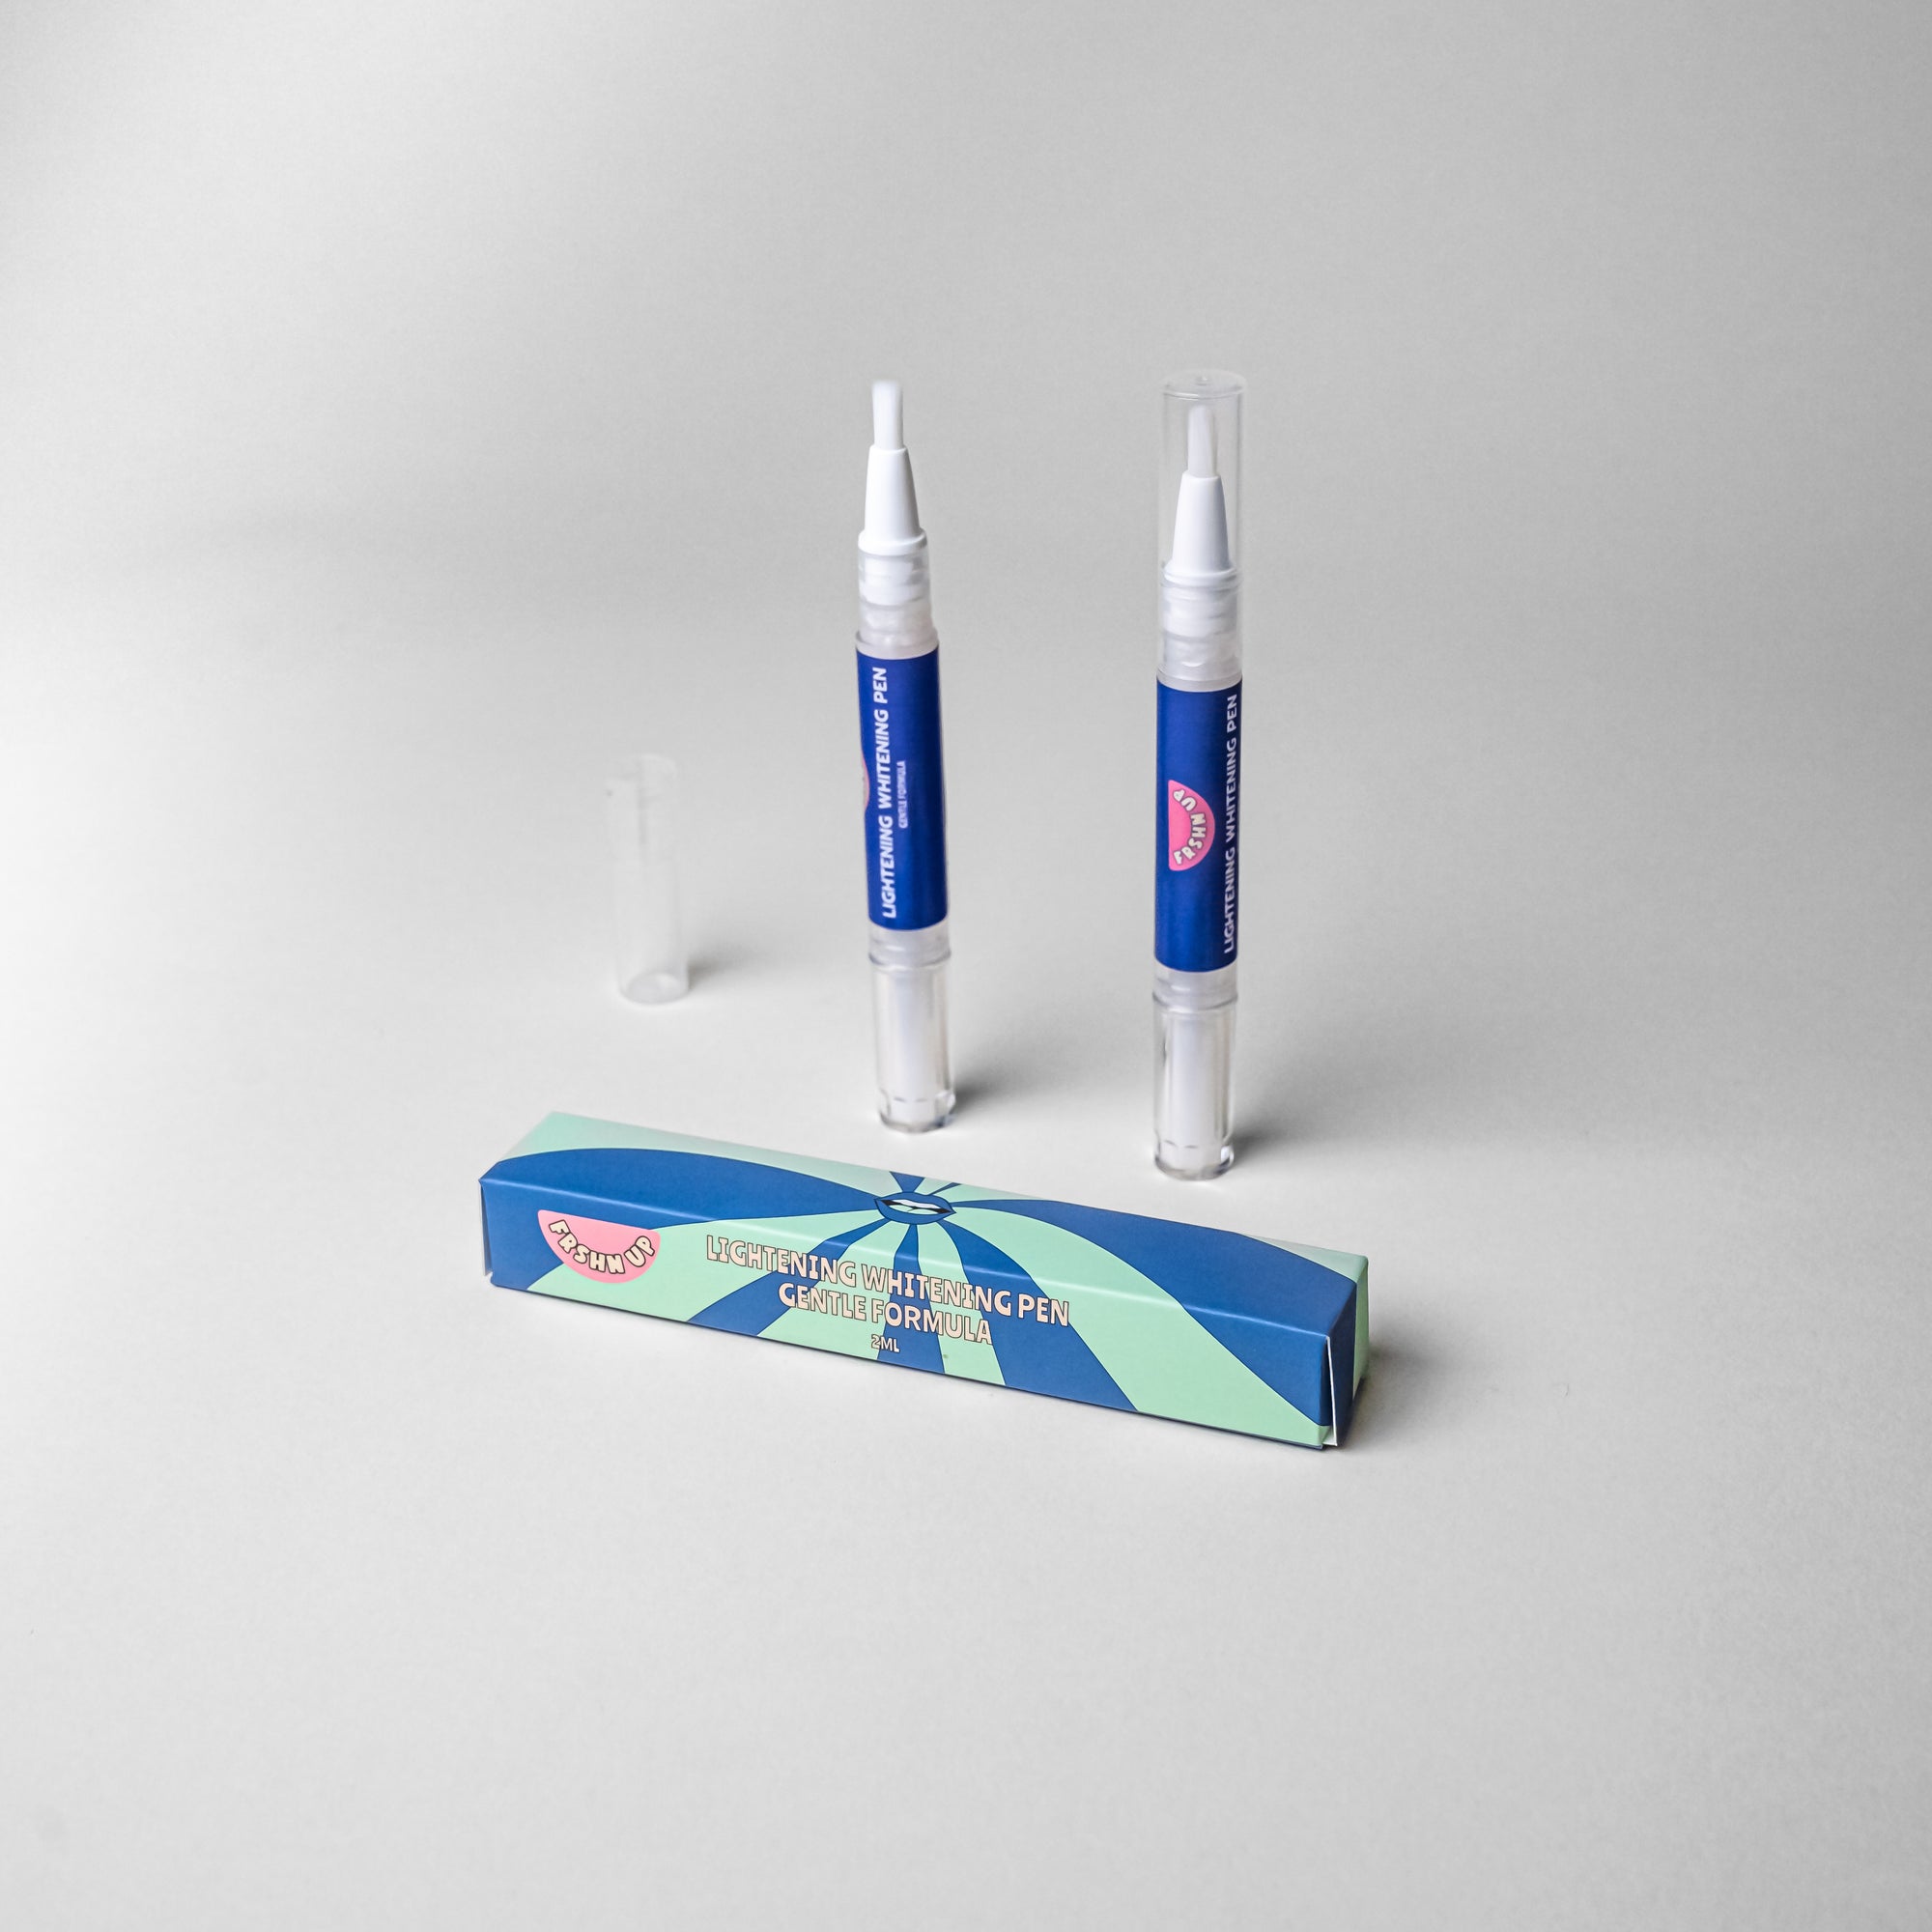 Two Lightening Whitening Pens - Gentle Formula - 2-pack by FRSHN UP in a box on a white surface.